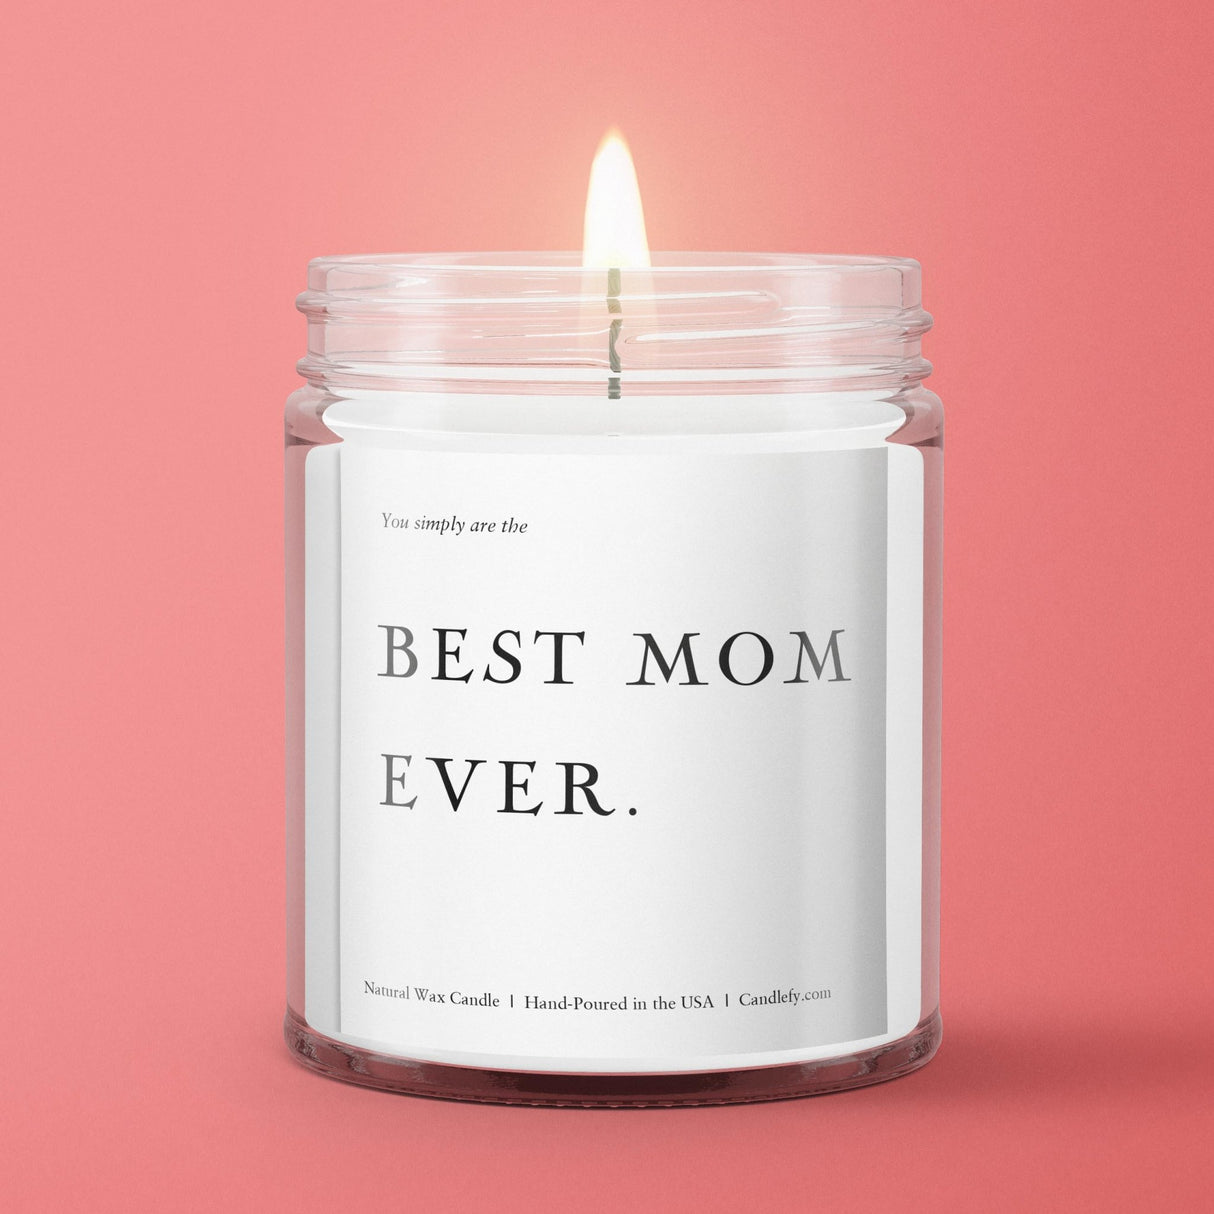 Candles for Home Scented Candles Mothers Day Gifts for Mom. Scent